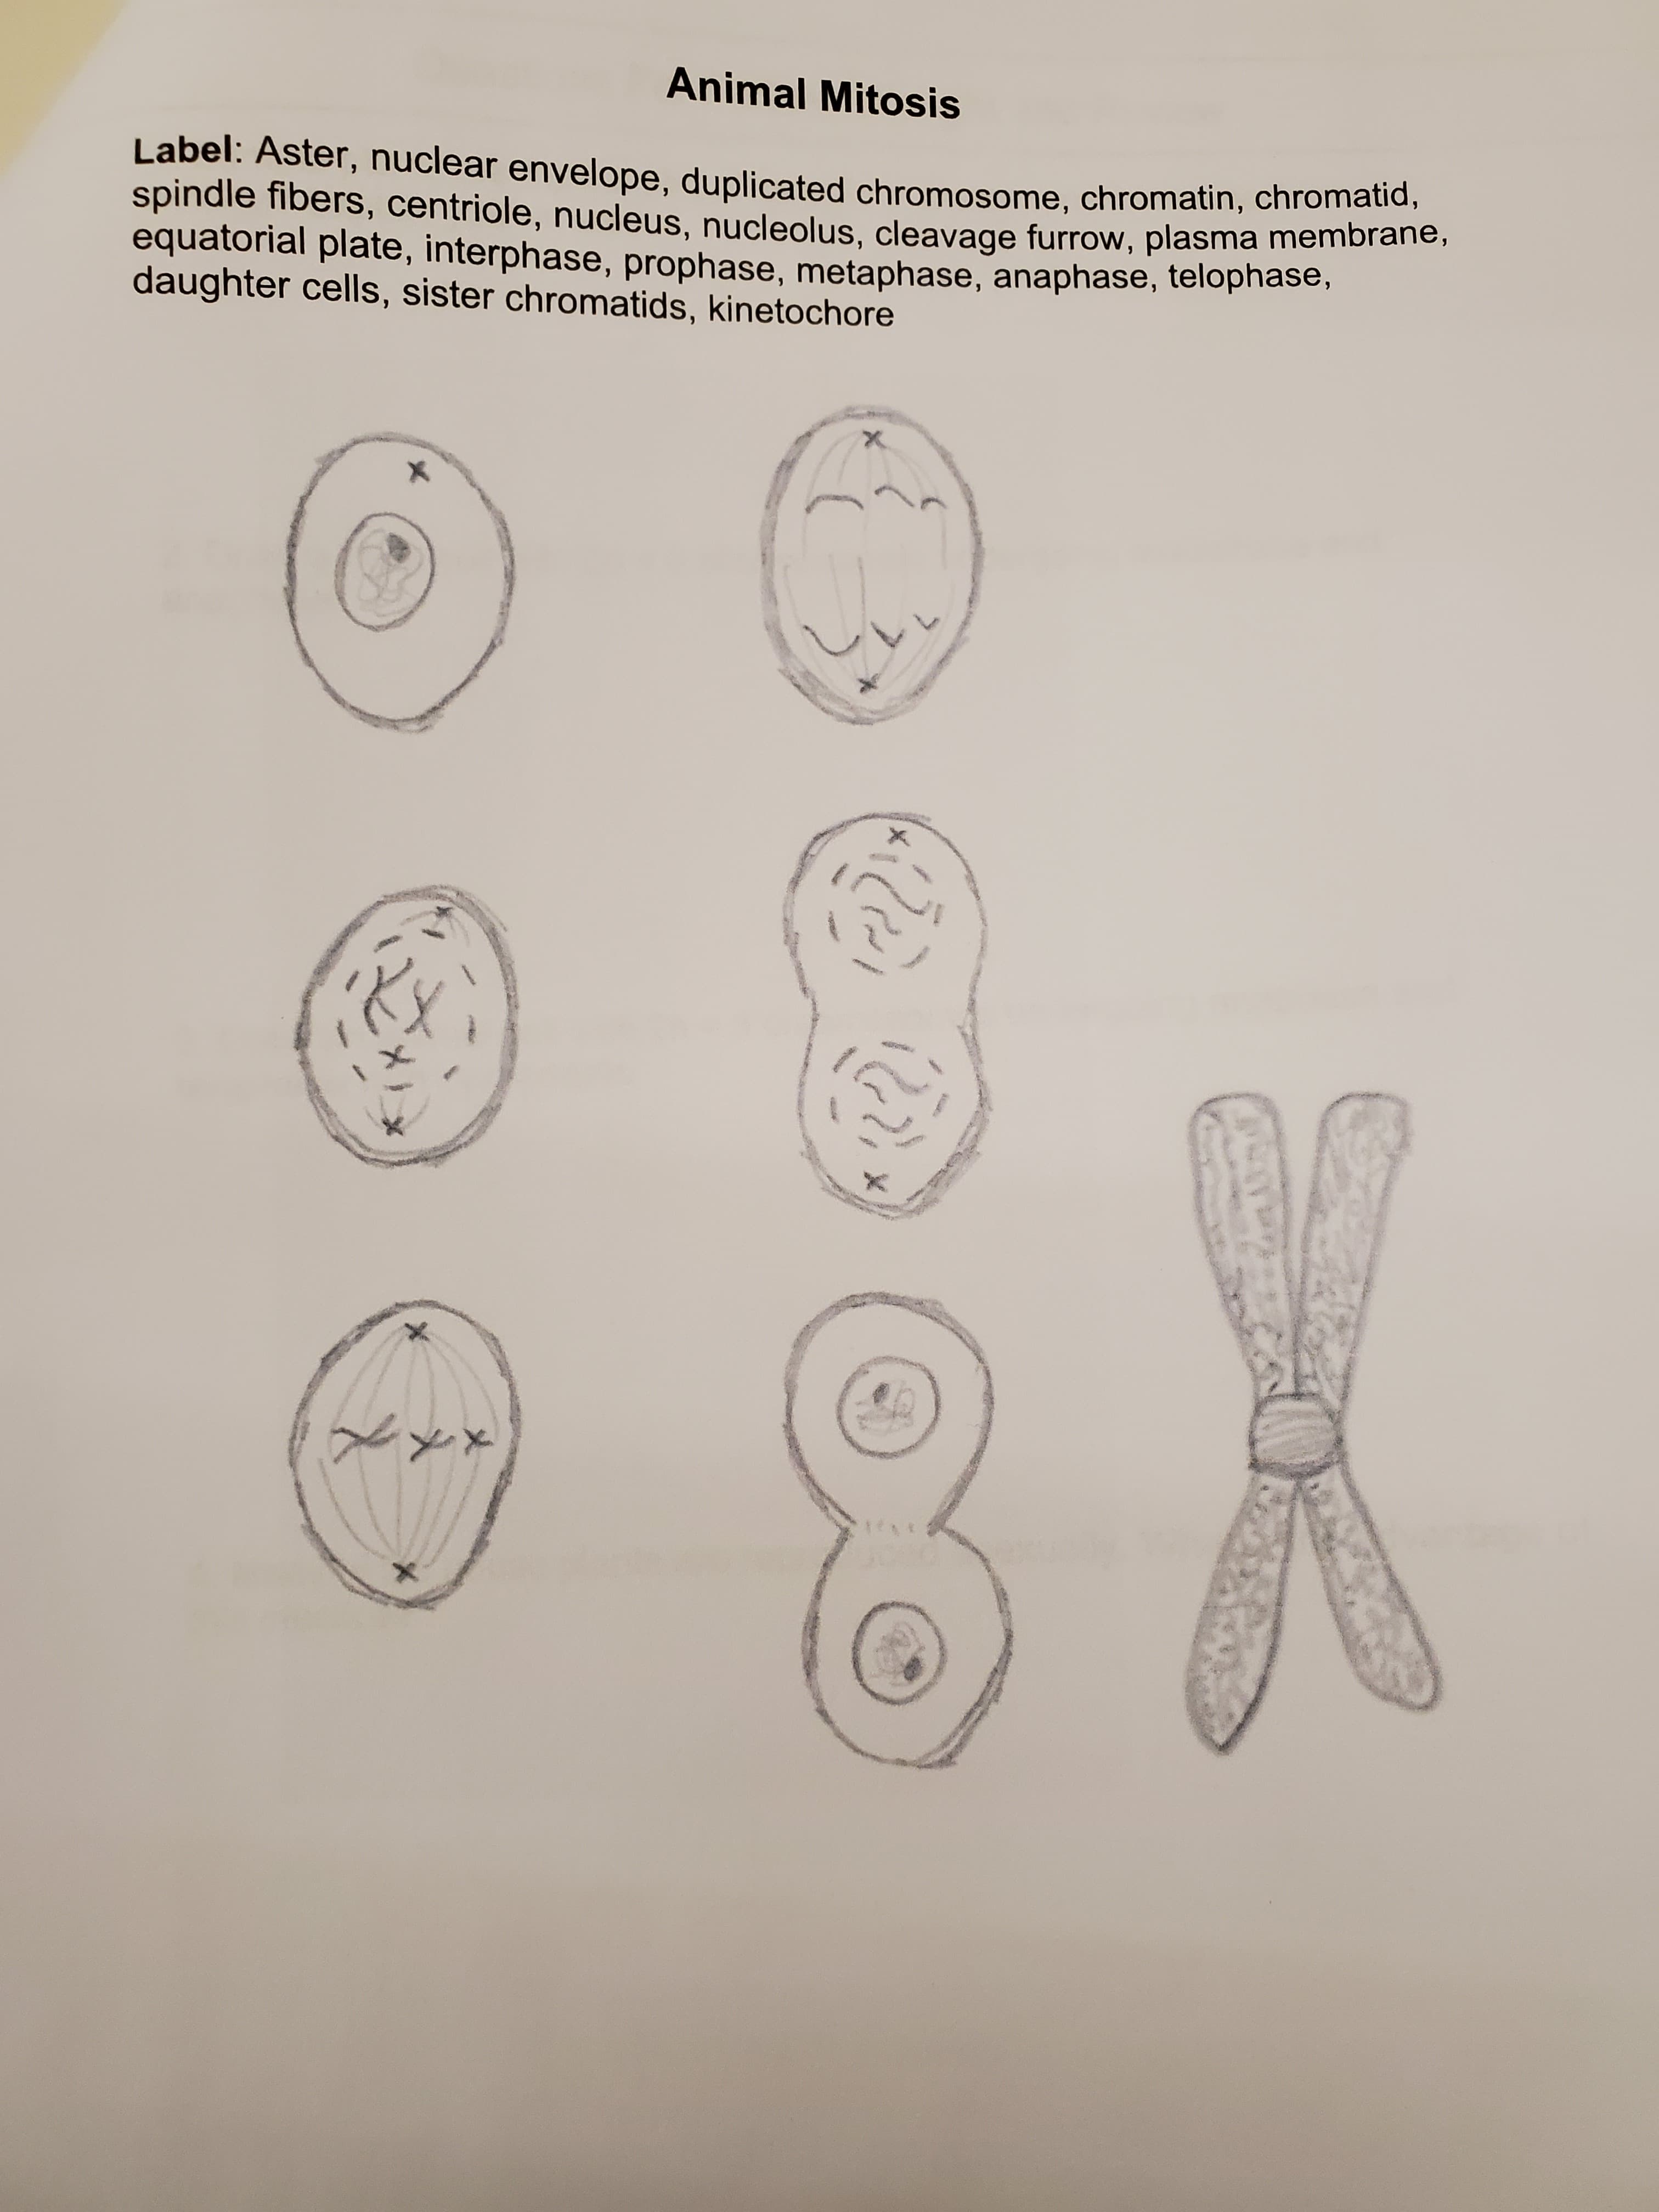 Animal Mitosis
Label: Aster, nuclear envelope, duplicated chromosome, chromatin, chromatid,
spindle fibers, centriole, nucleus, nucleolus, cleavage furrow, plasma membrane,
equatorial plate, interphase, prophase, metaphase, anaphase, telophase,
daughter cells, sister chromatids, kinetochore
1t
A
